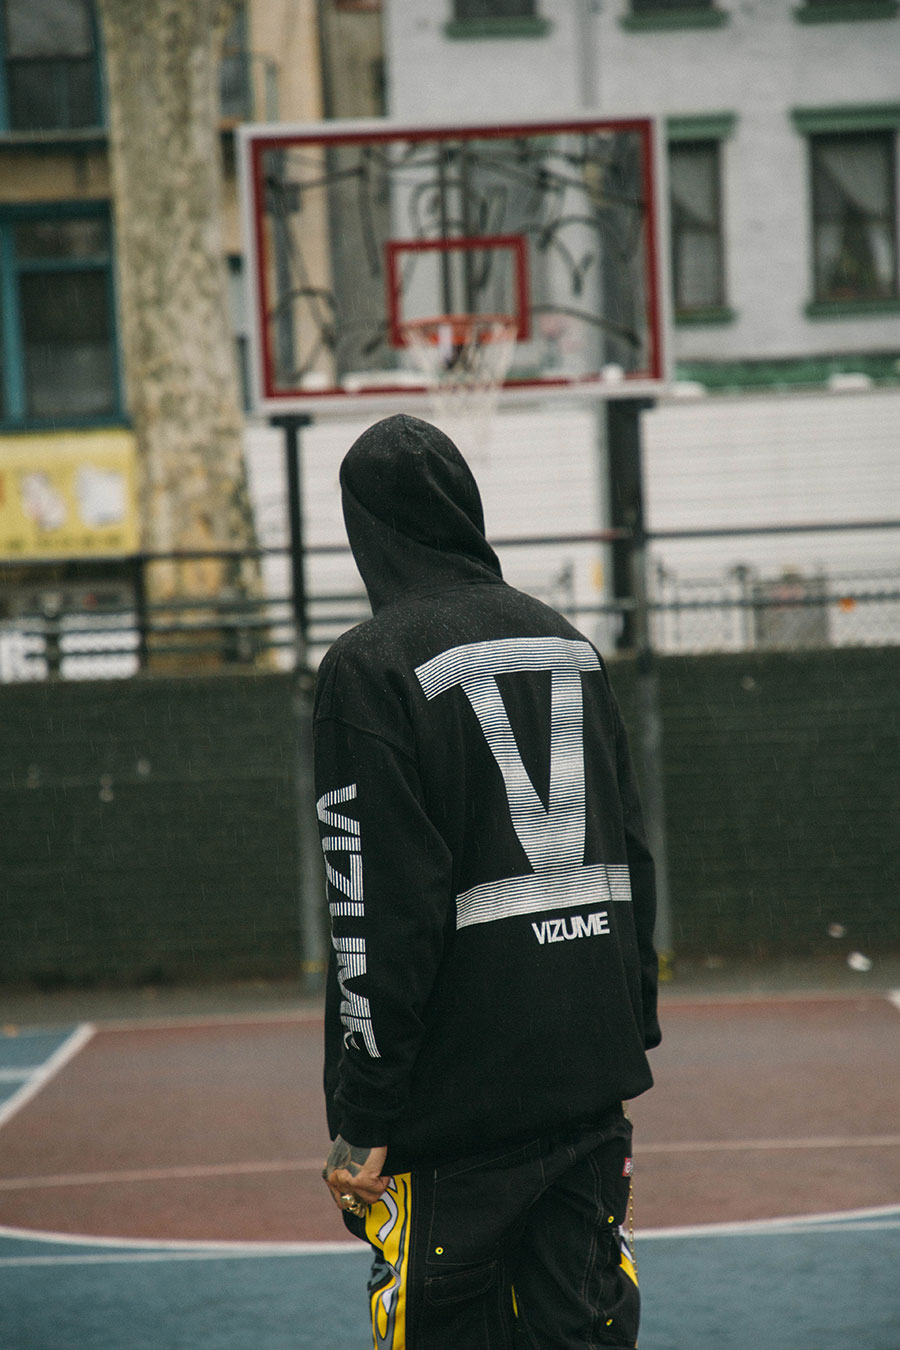 Vizume 5 Year Hooded Pullover with 3M Print